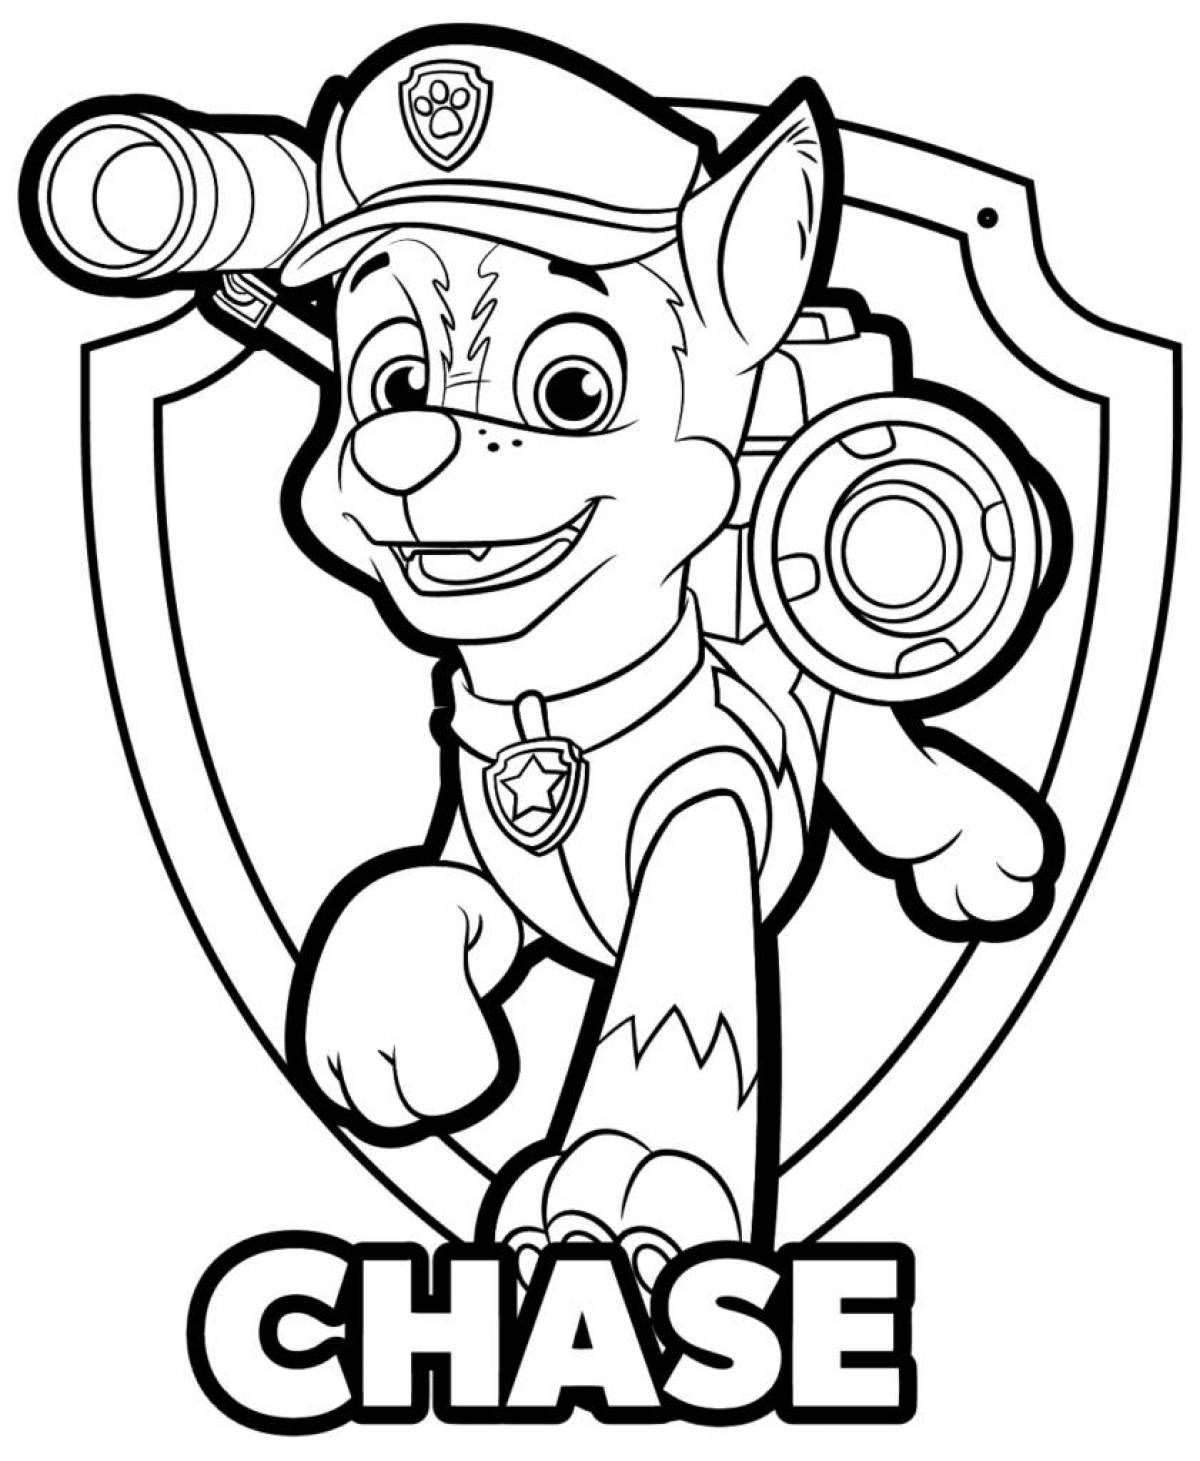 Amazing Paw Patrol coloring book for kids